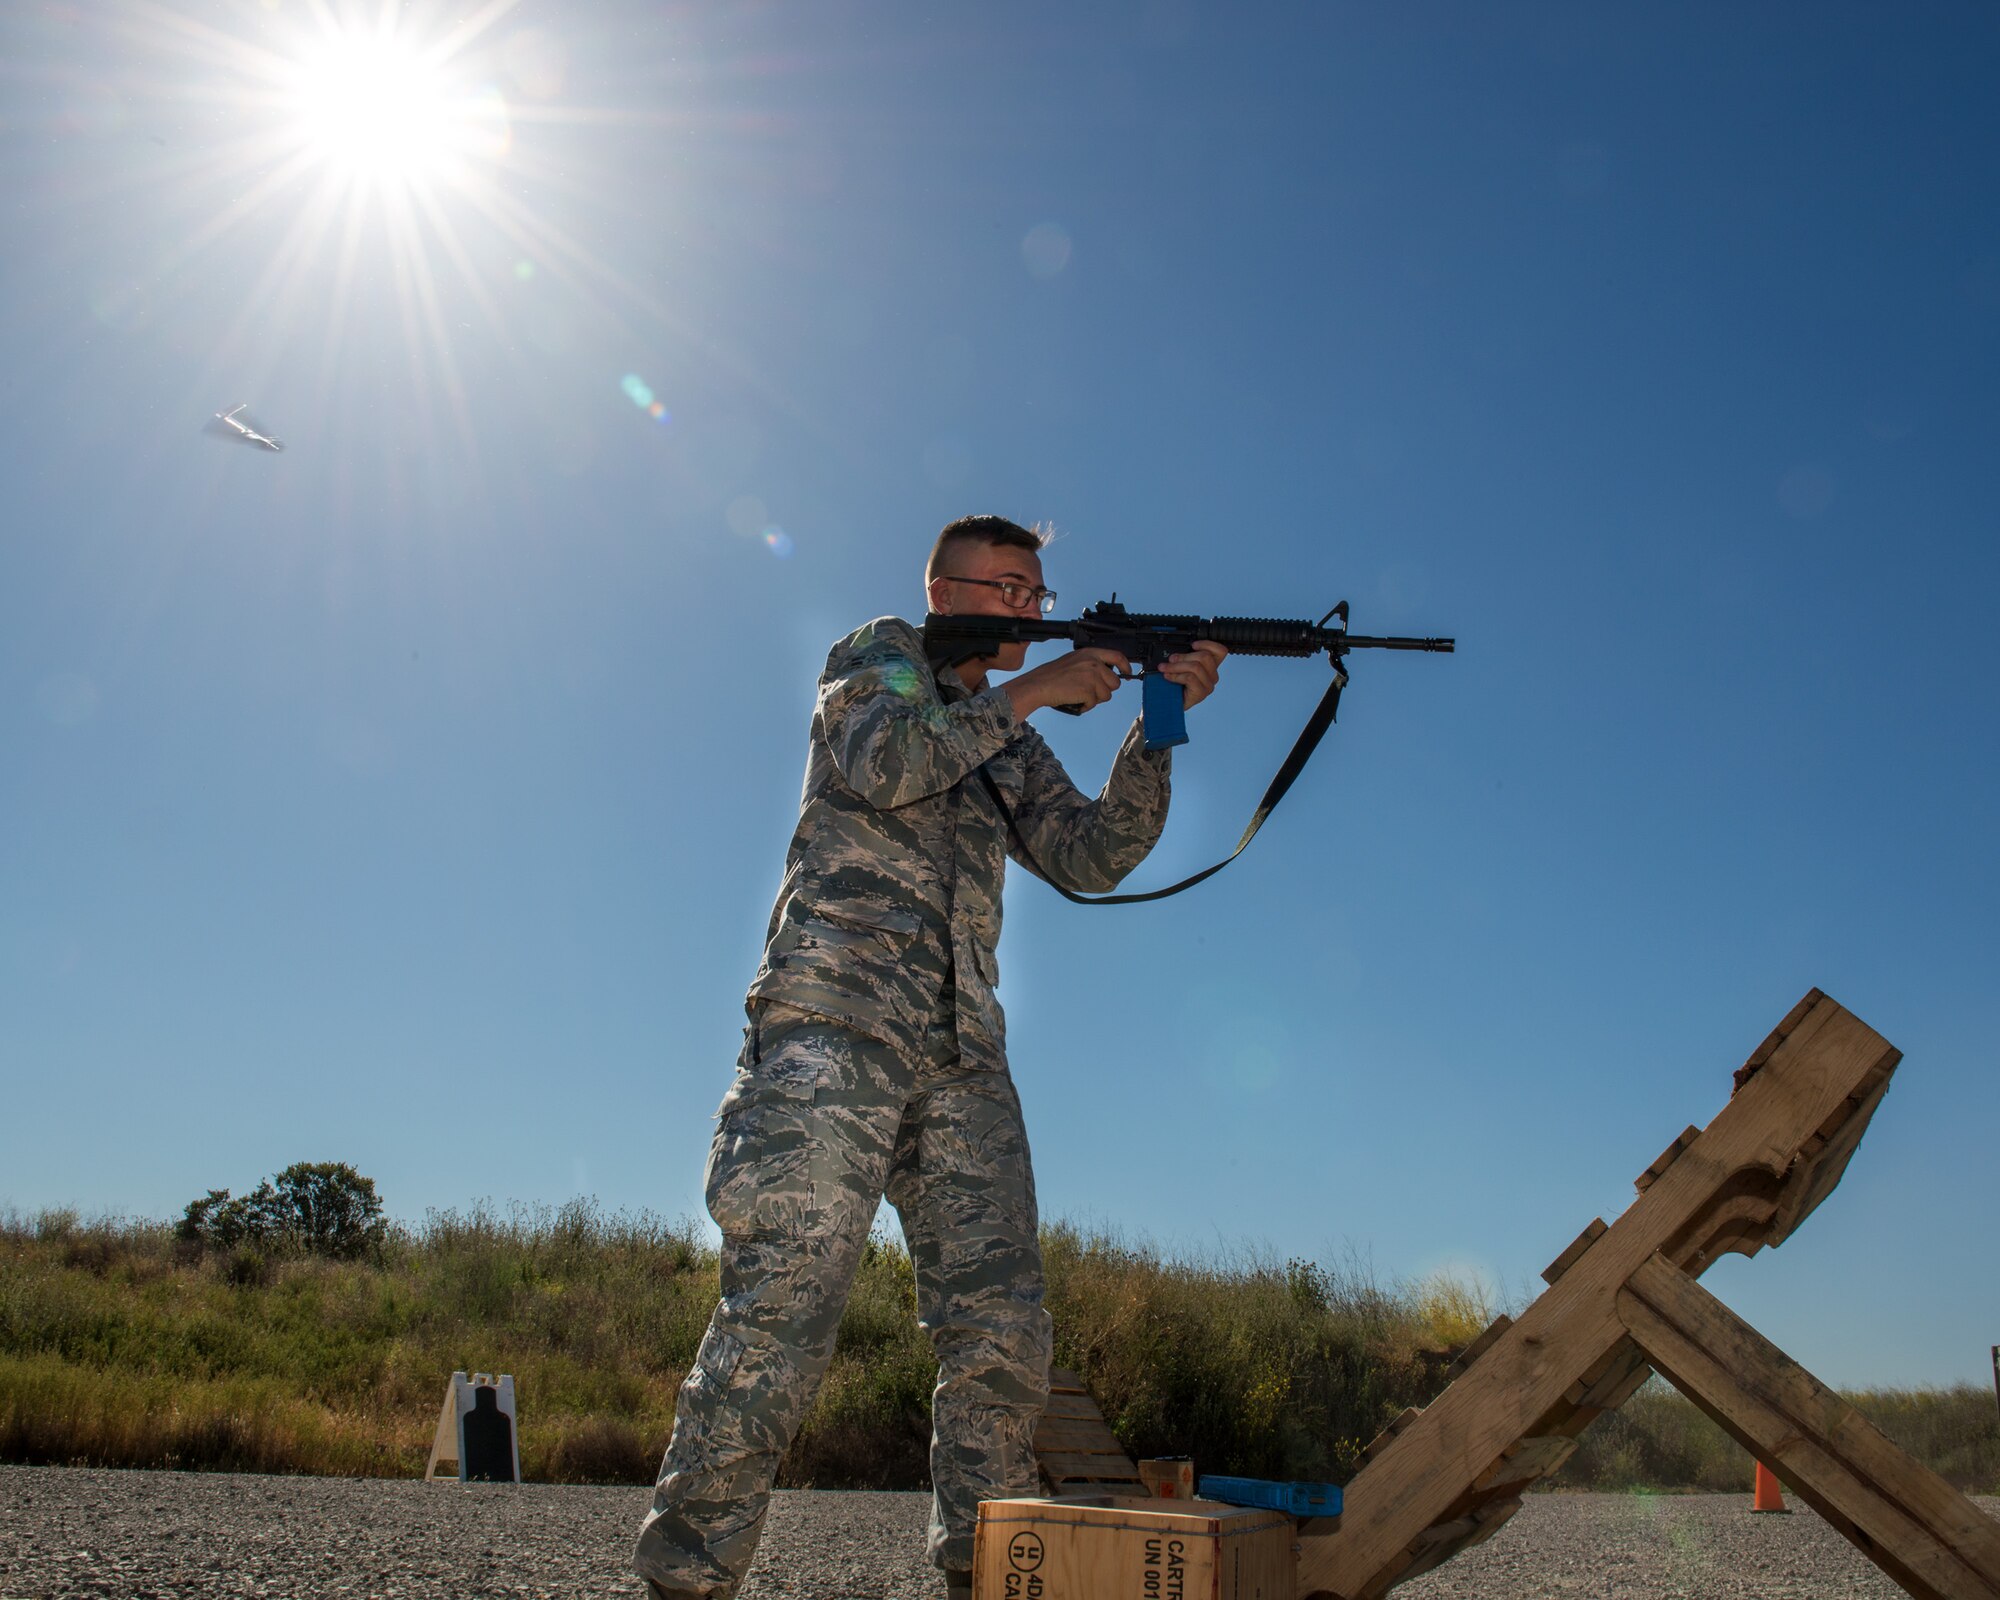 U.S. Air Force Airman 1st Class Joshua Adolf,60th Security Forces Squadron, Travis Air Force Base, Calif., competes in a shooting competition May 18, 2017. The competition was one of several events sponsored by the squadron in honor of Police Week. (U.S. Air Force photo by Louis Briscese)